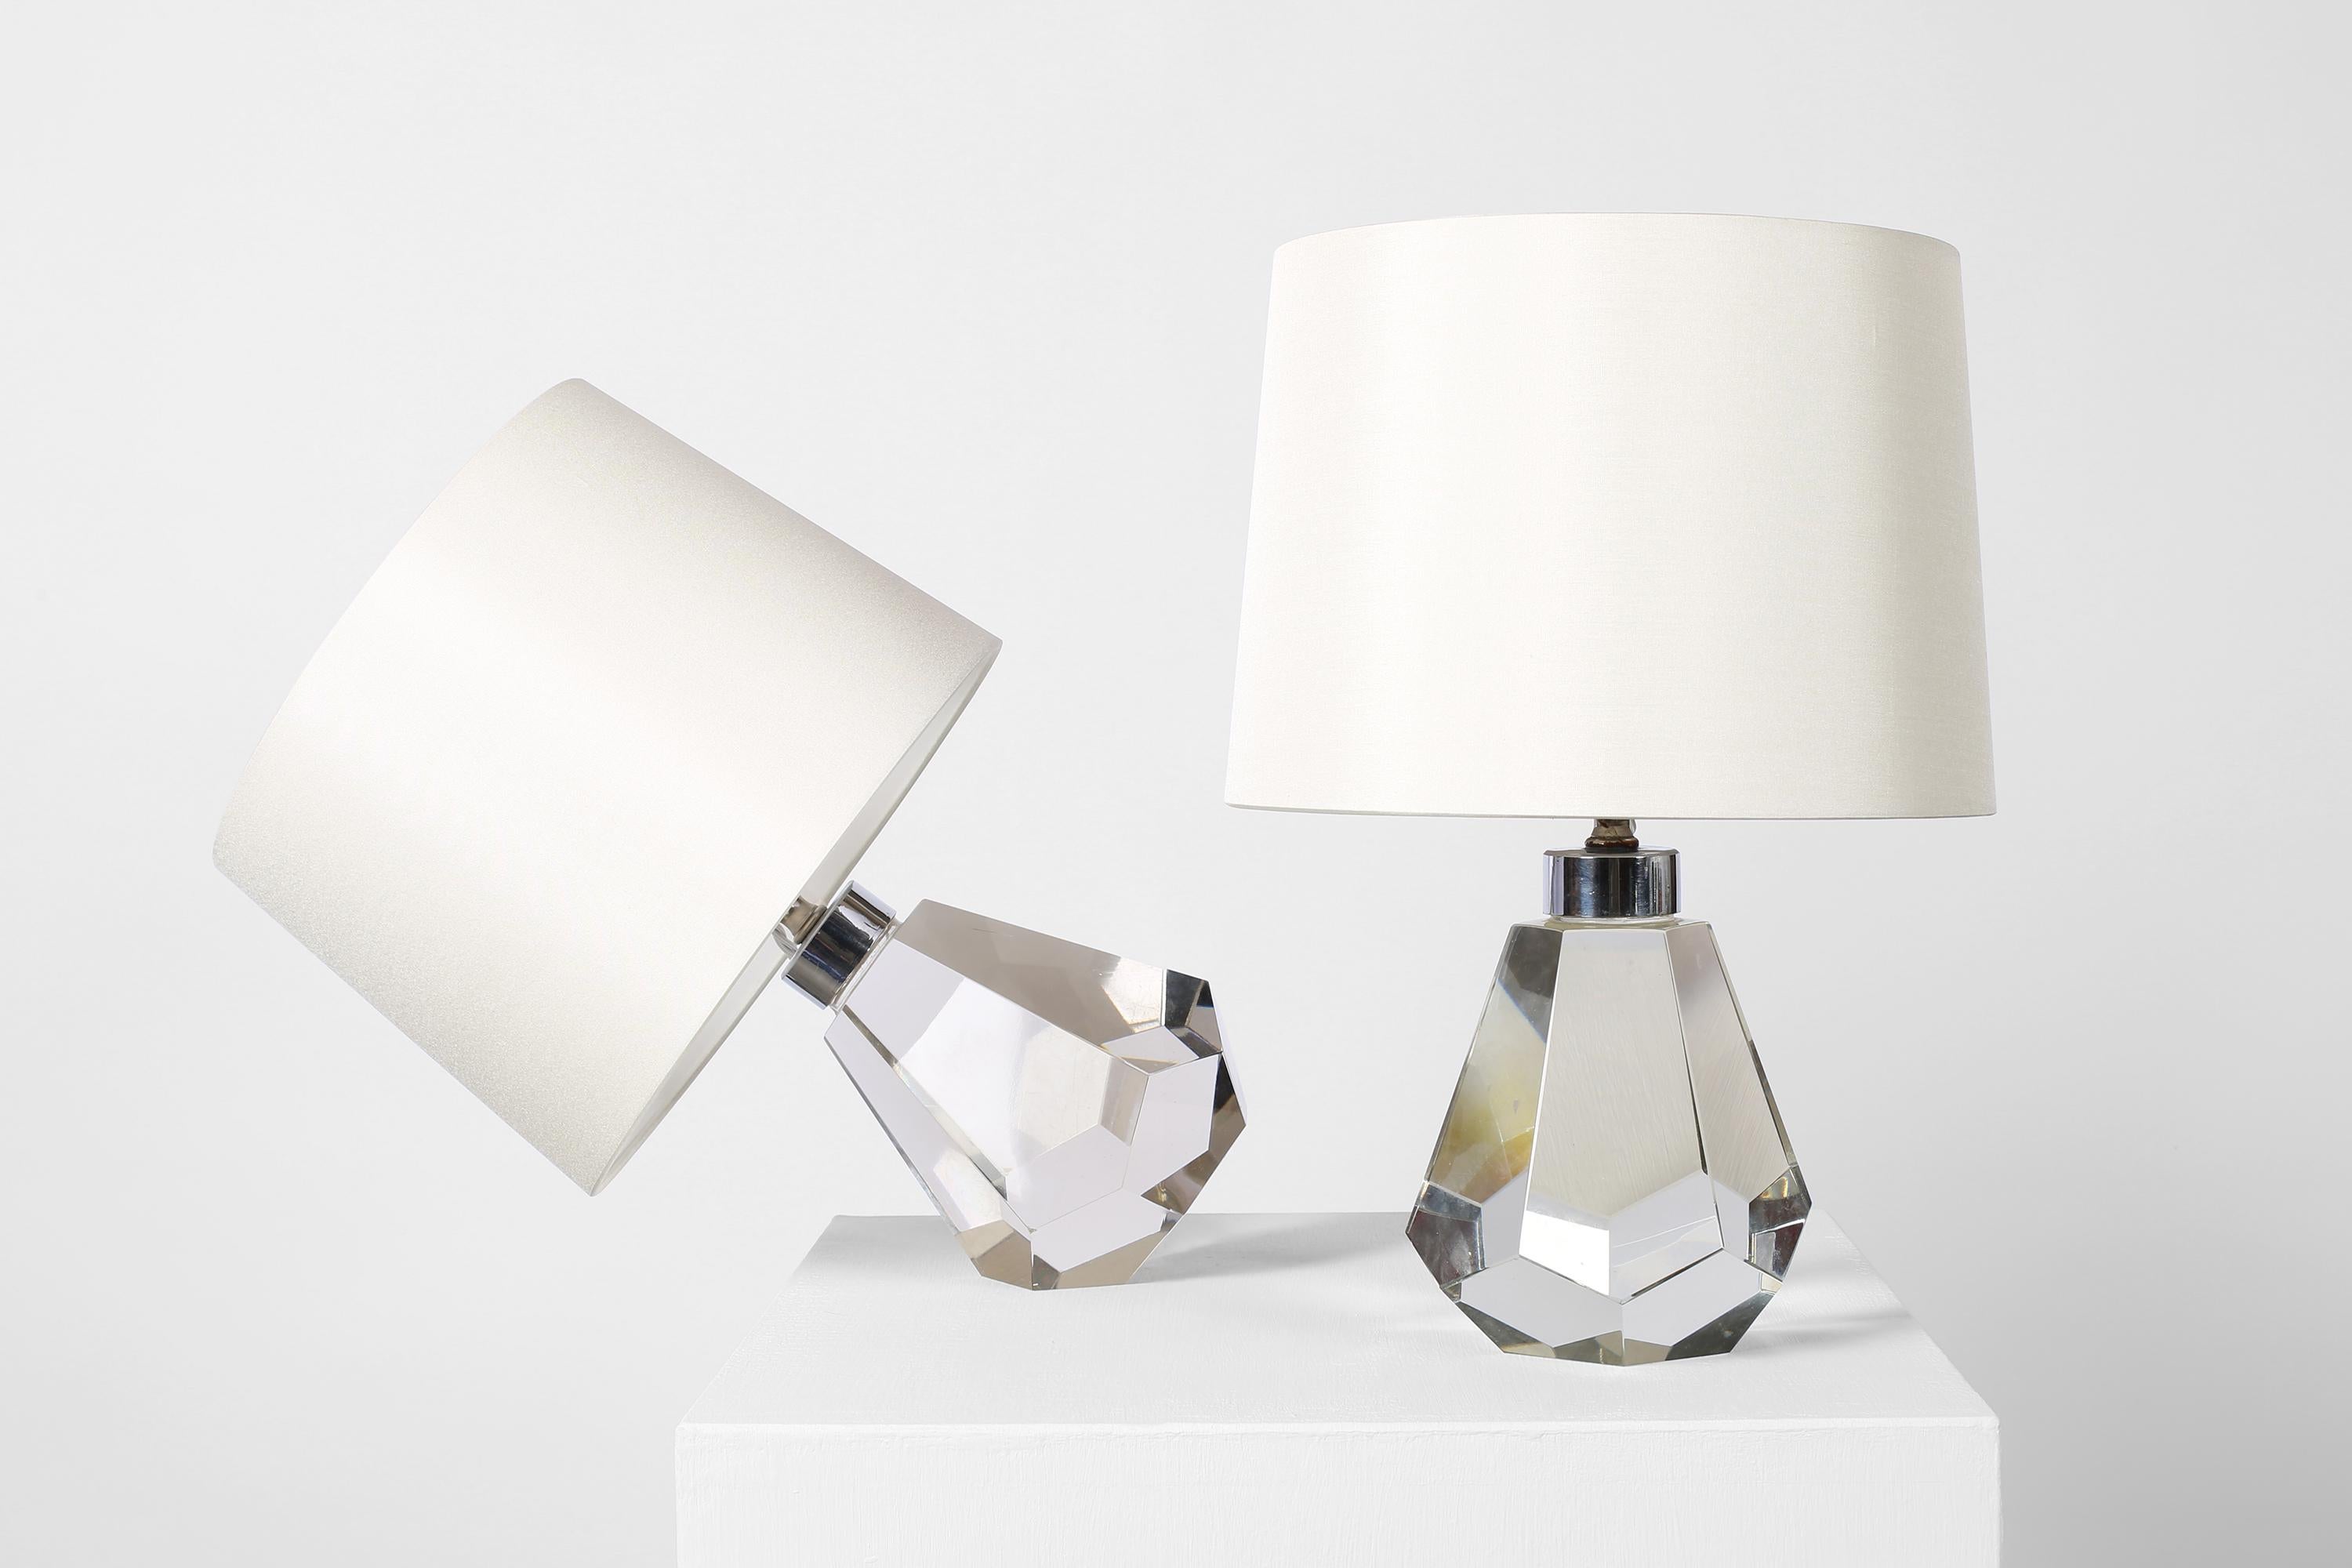 A rare pair of Art Deco faceted crystal glass table lamps of jewel-like form. The angular base allowing the lamps to sit vertically, or at an angle, much like Jacques Adnet’s Baccarat crystal ball lamp. French, c. 1930s. Supplied with off white